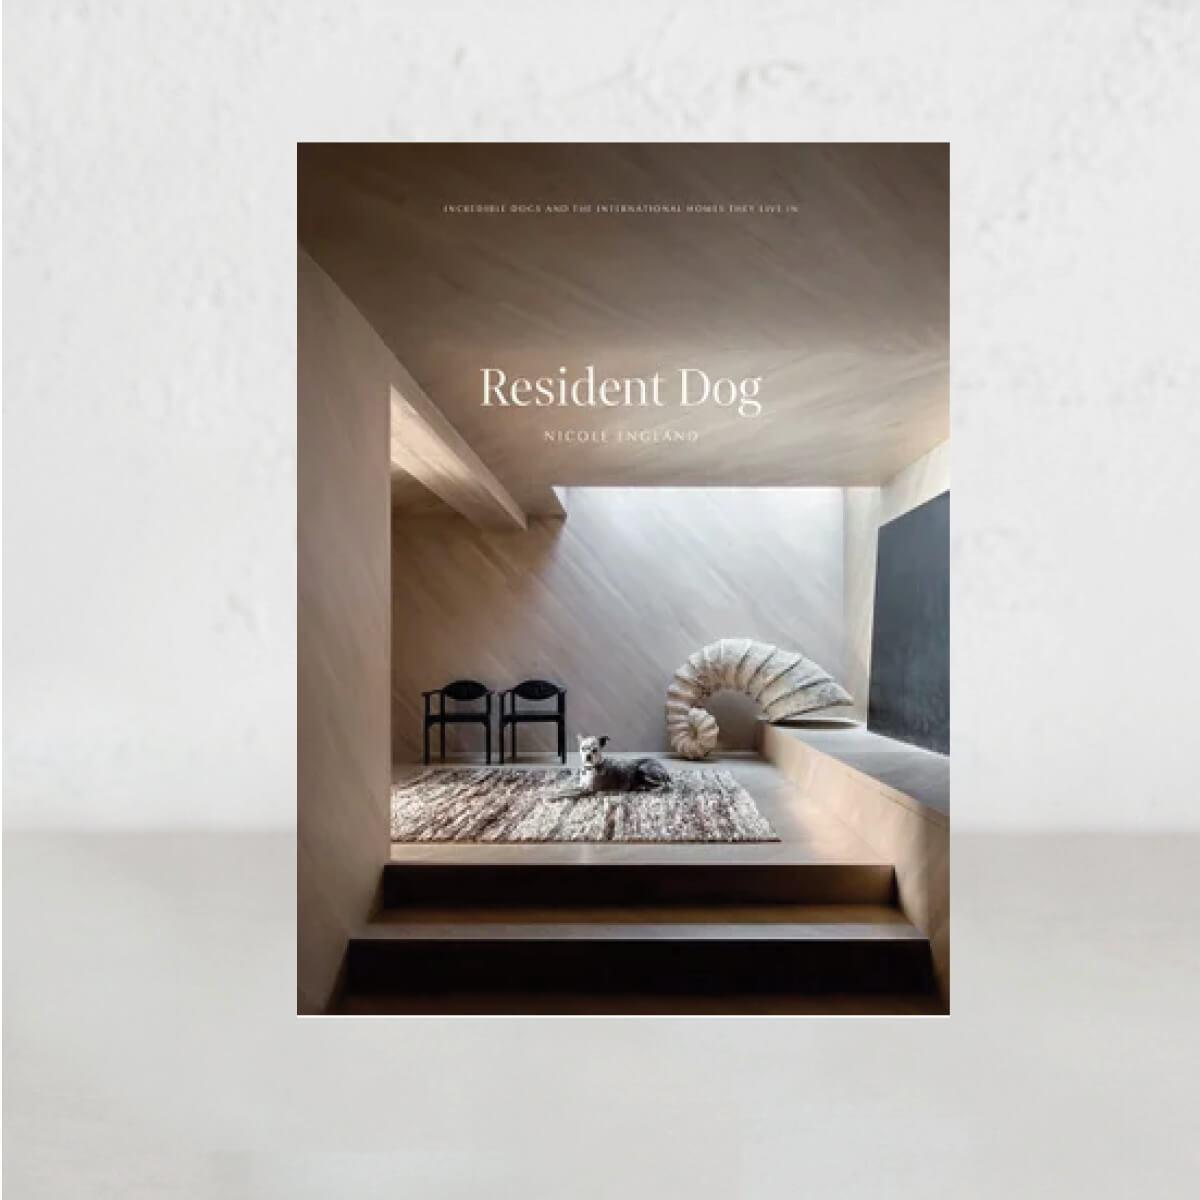 Resident Dog Volume 2 by Nicole England - THE PLANT SOCIETY